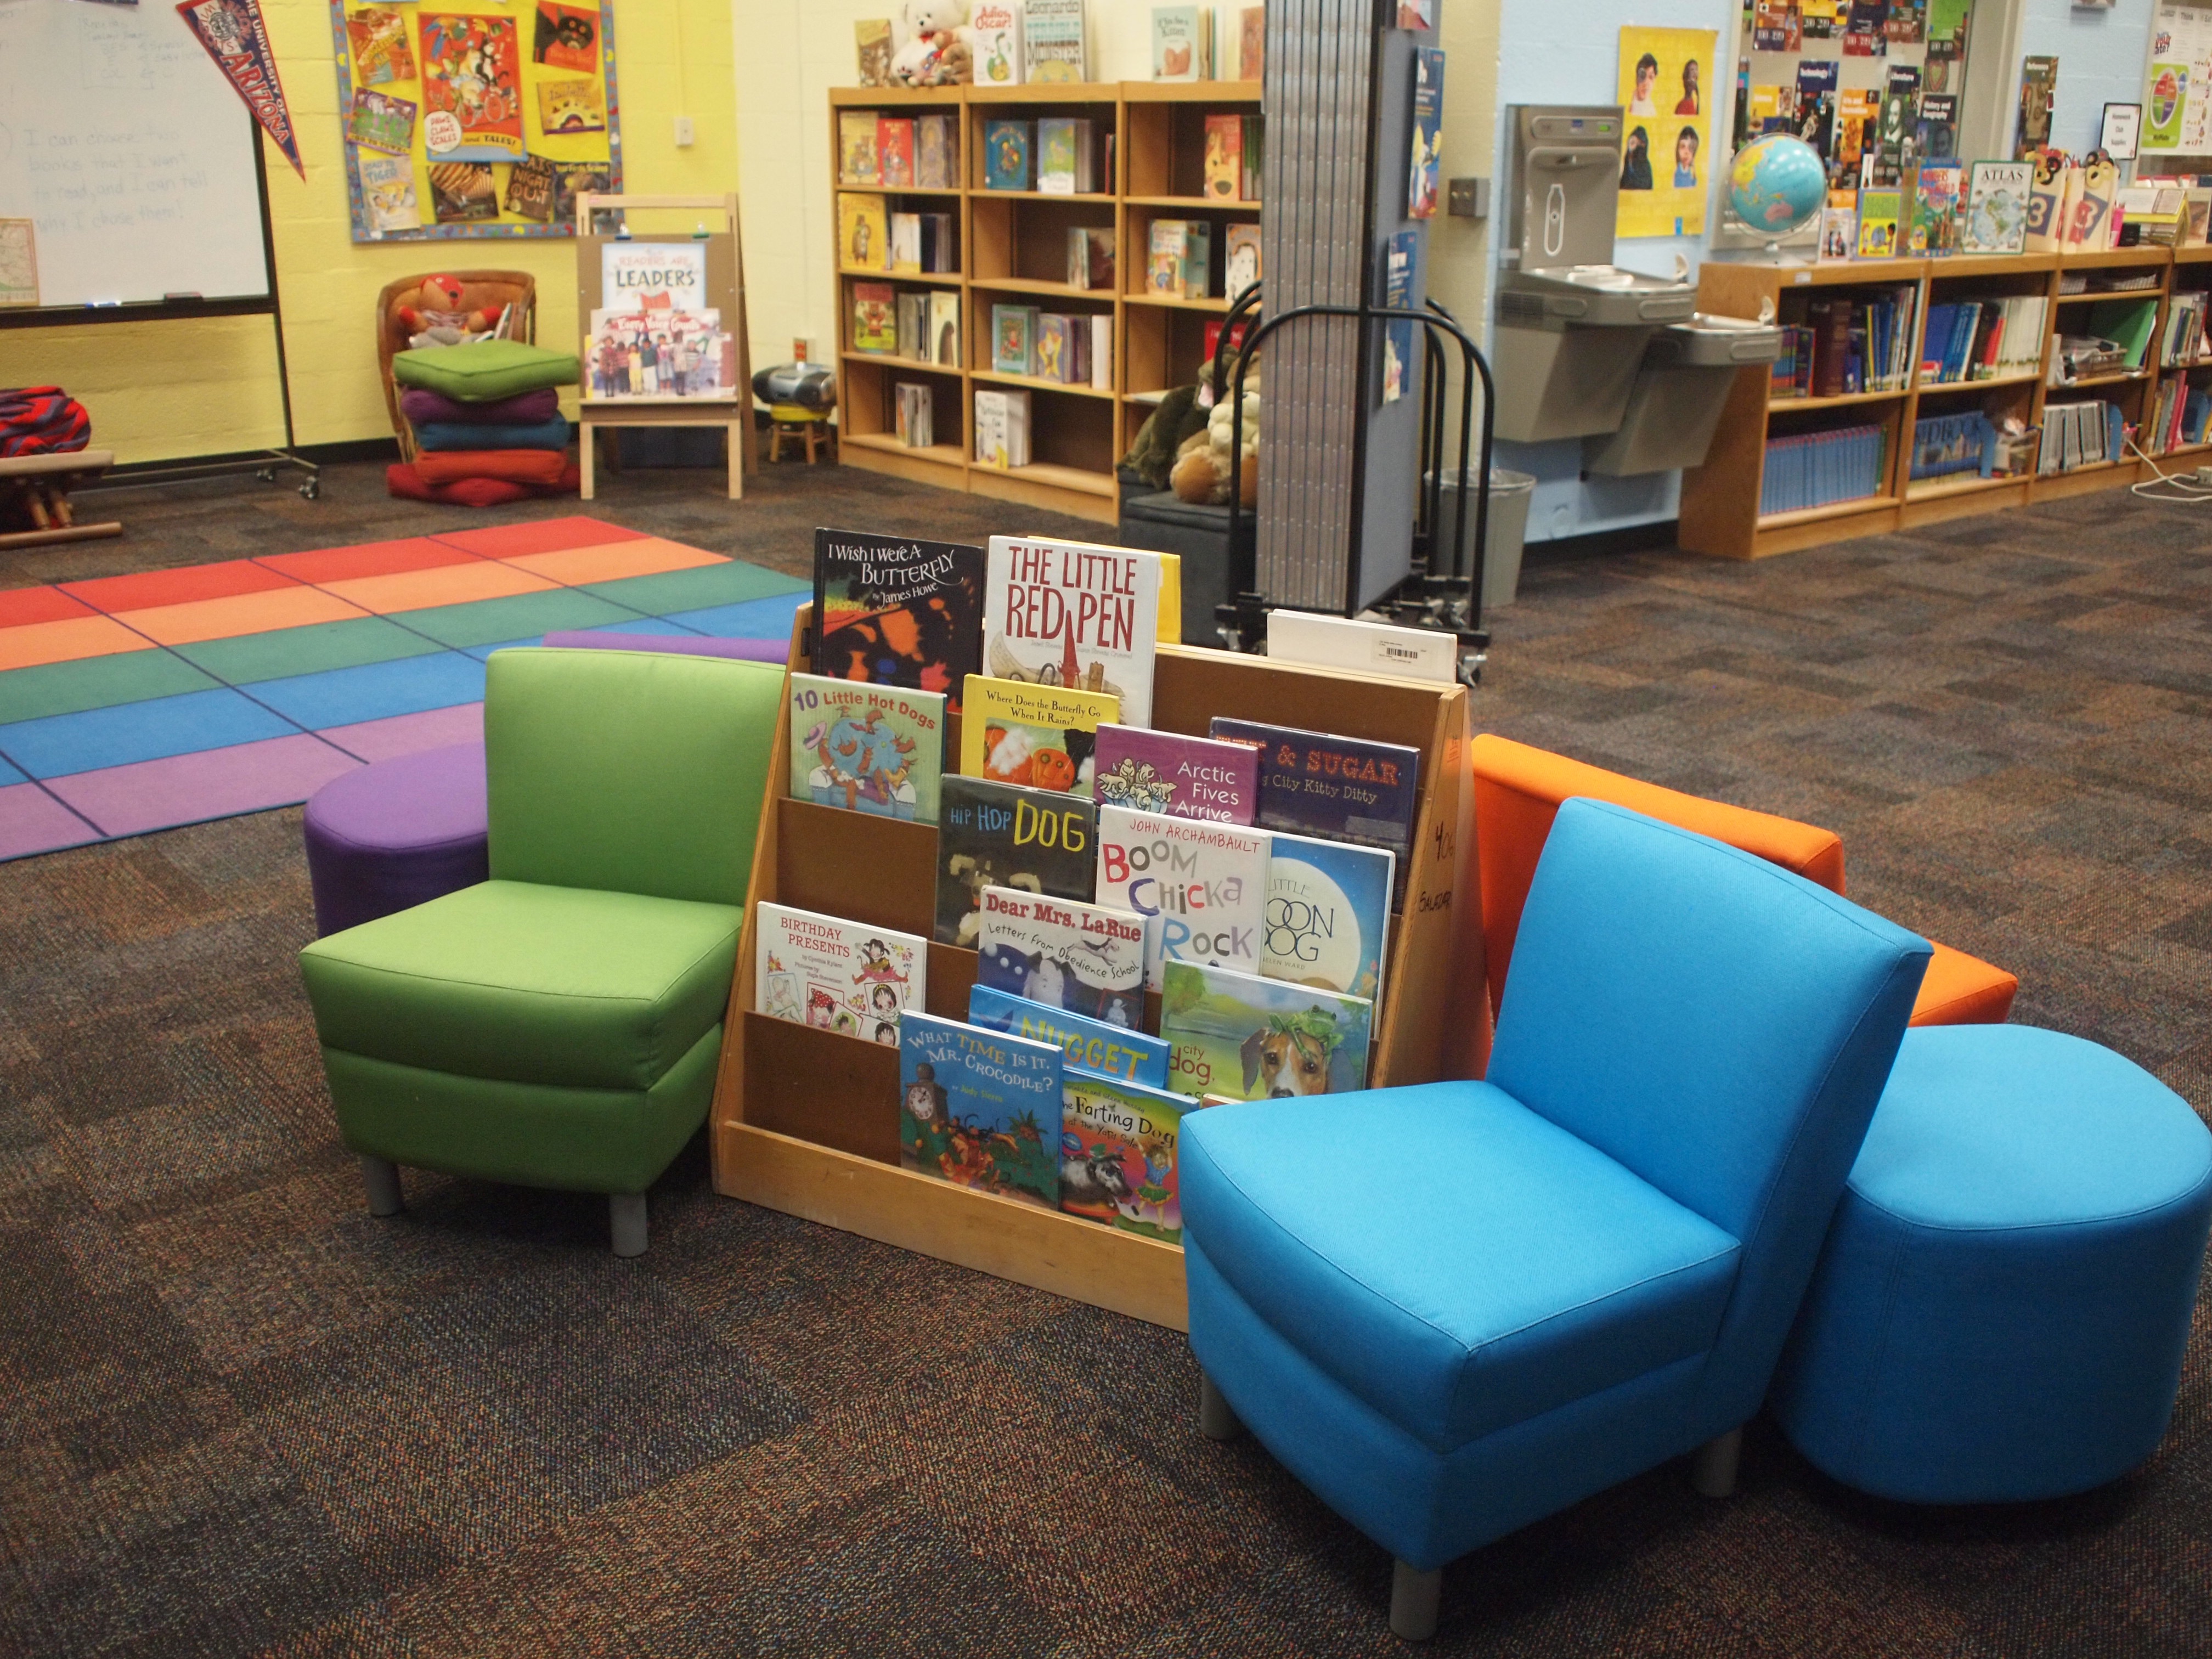 children's lounge chairs sale